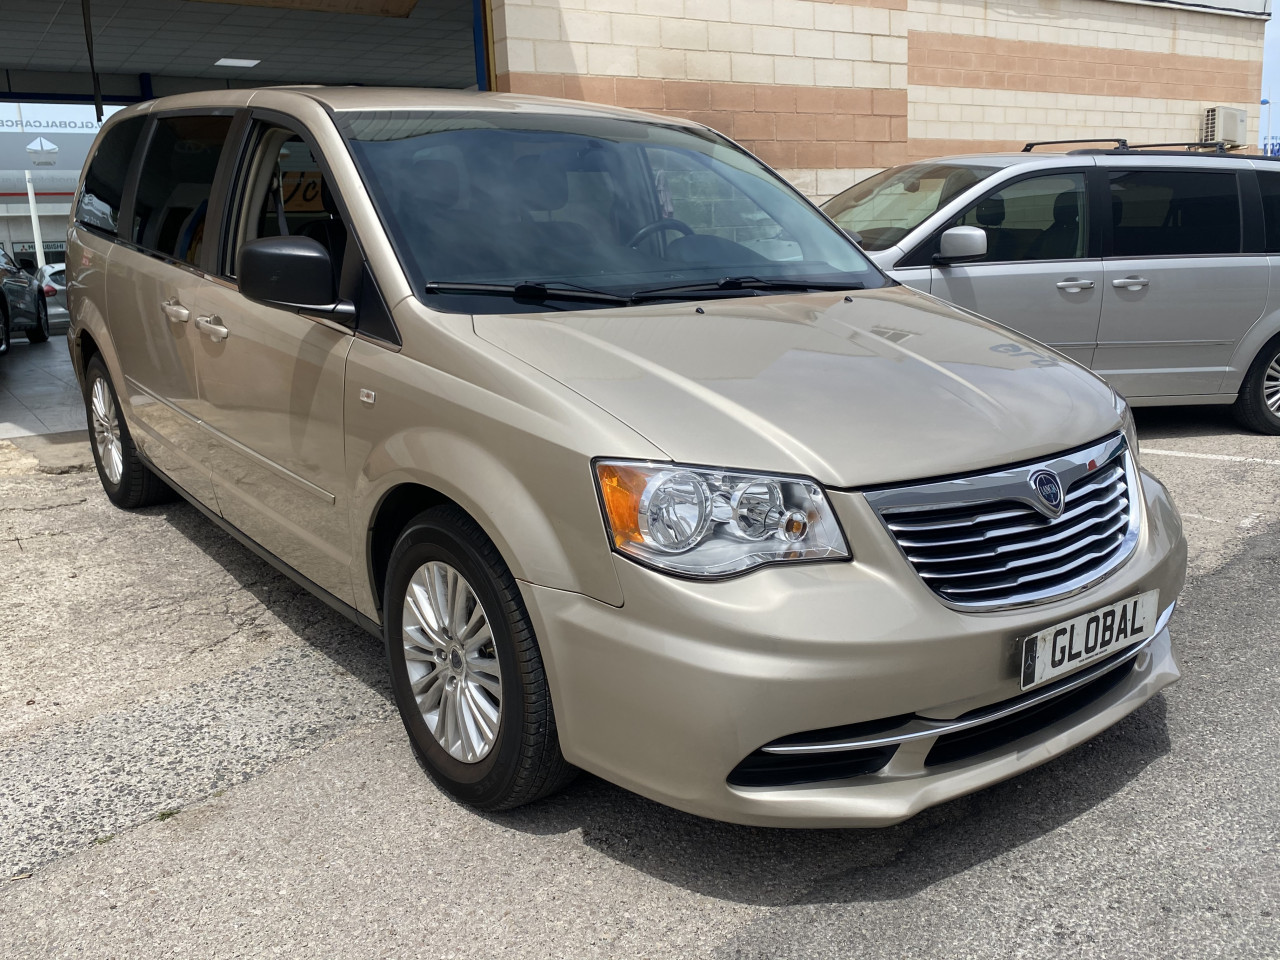 Lancia Grand Voyager 2.8 Crdi Automatic People carrier 2015 